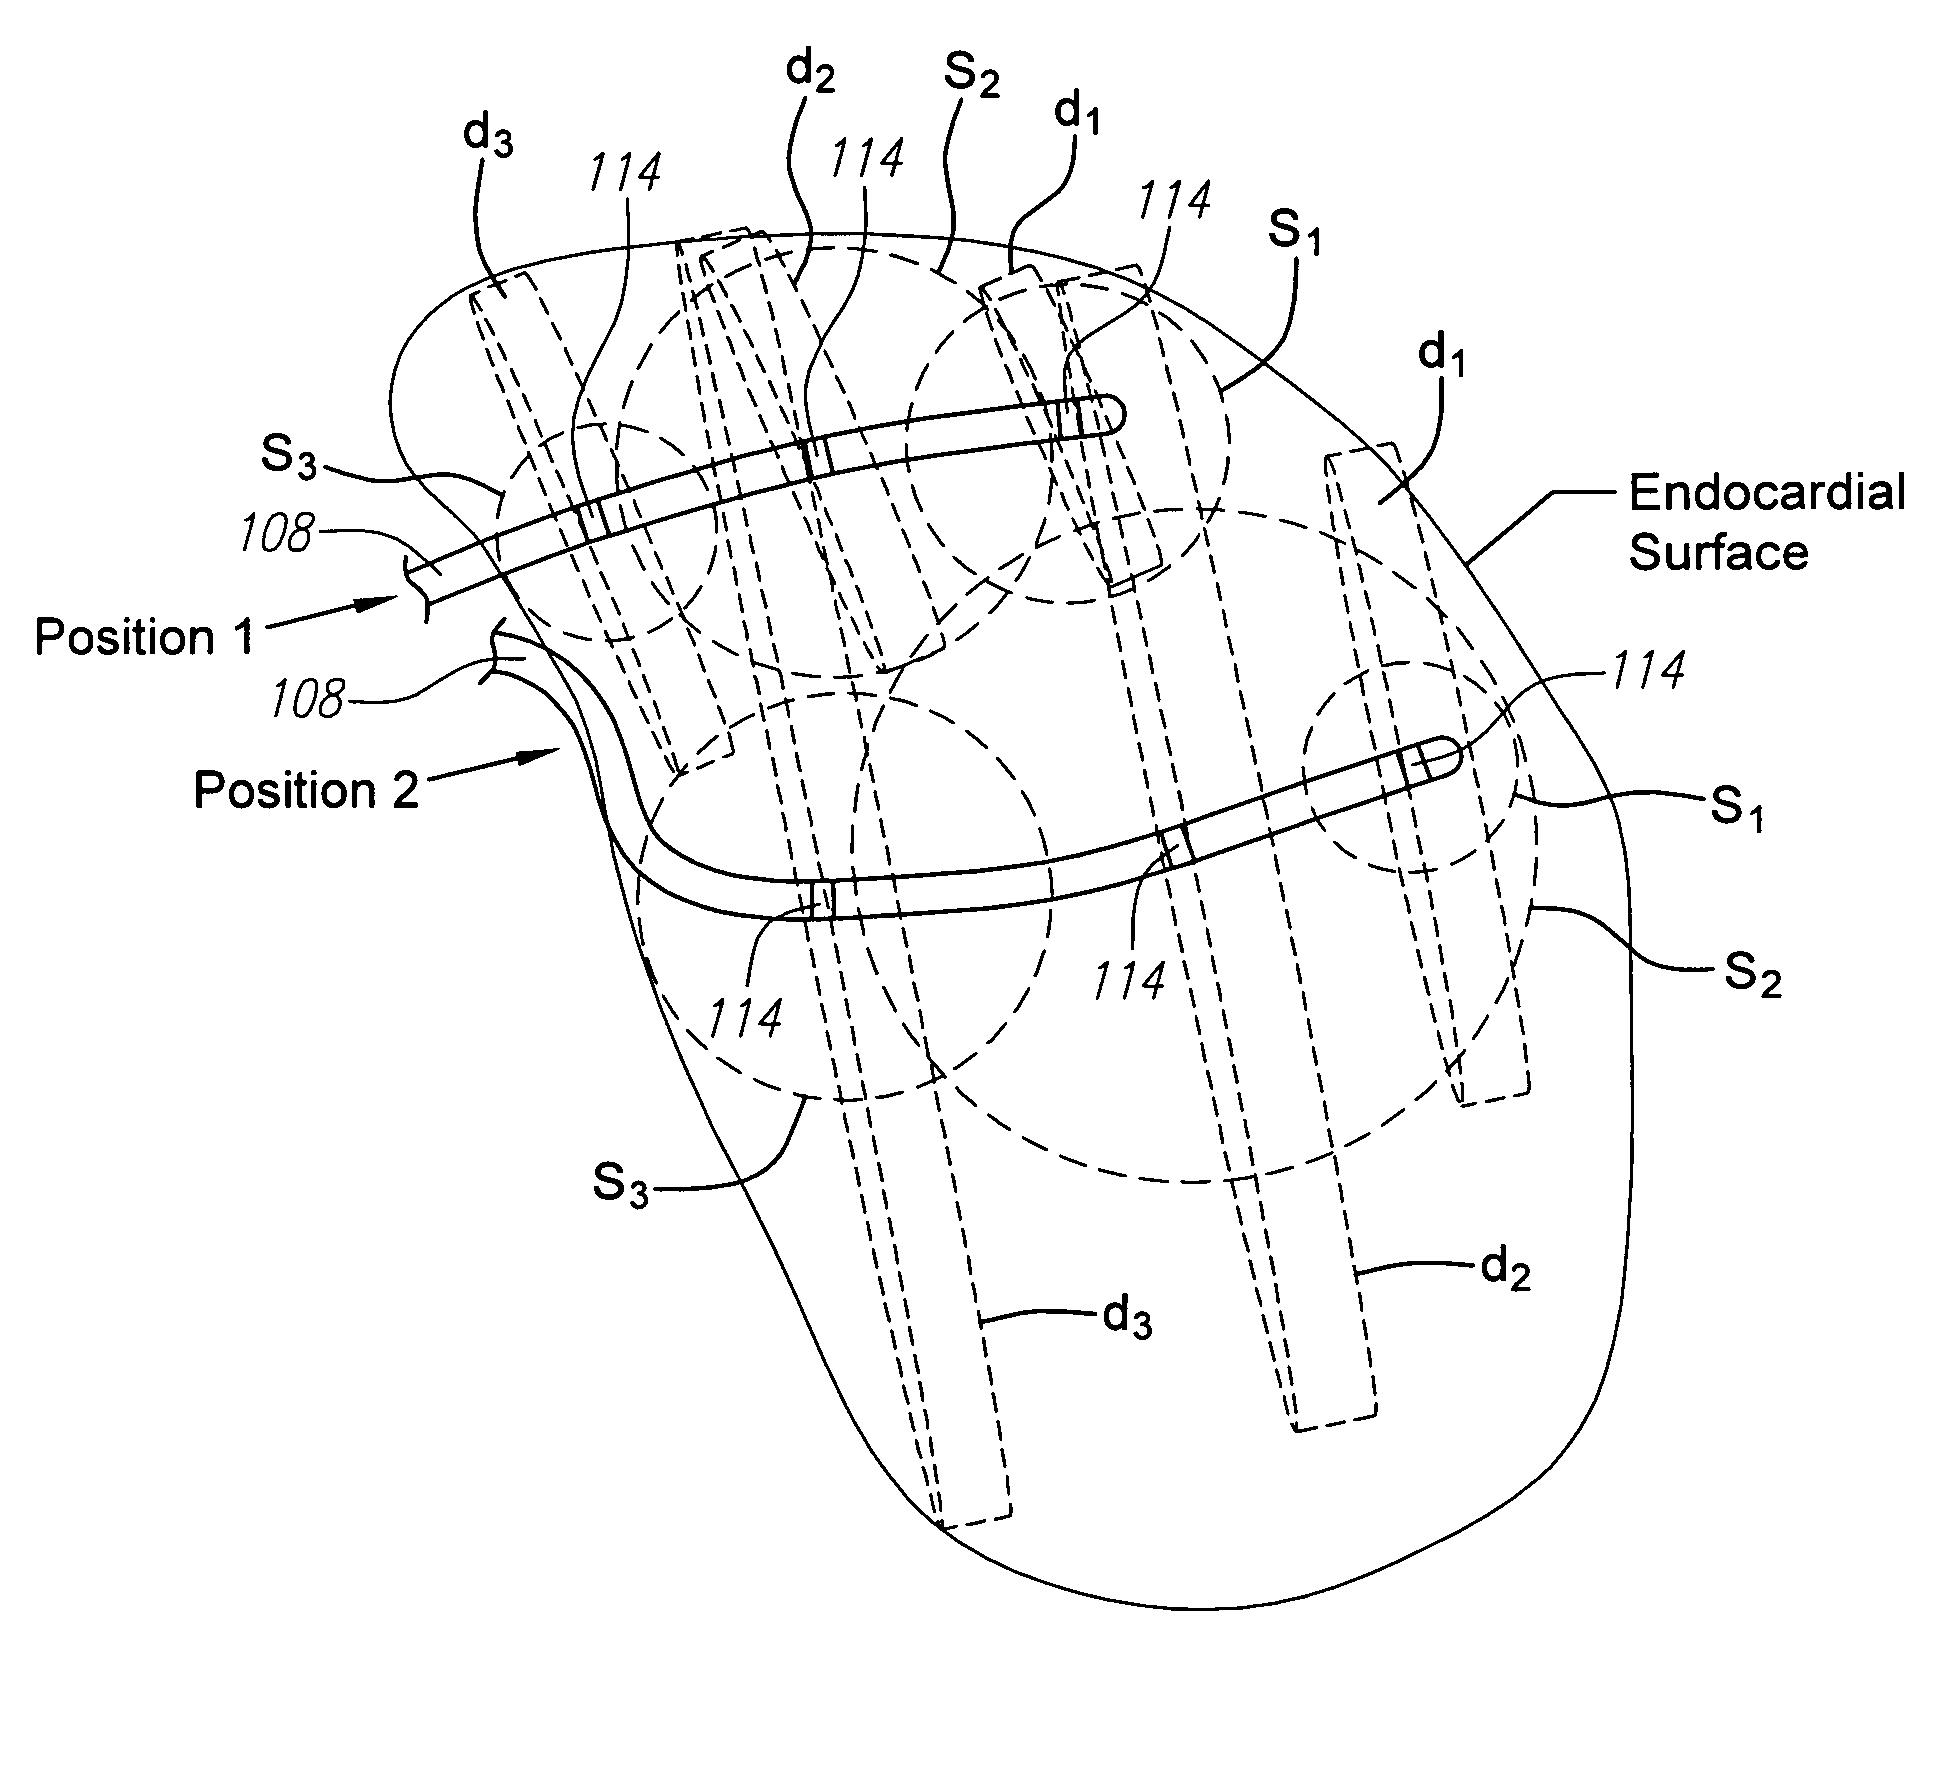 System and method of graphically generating anatomical structures using ultrasound echo information